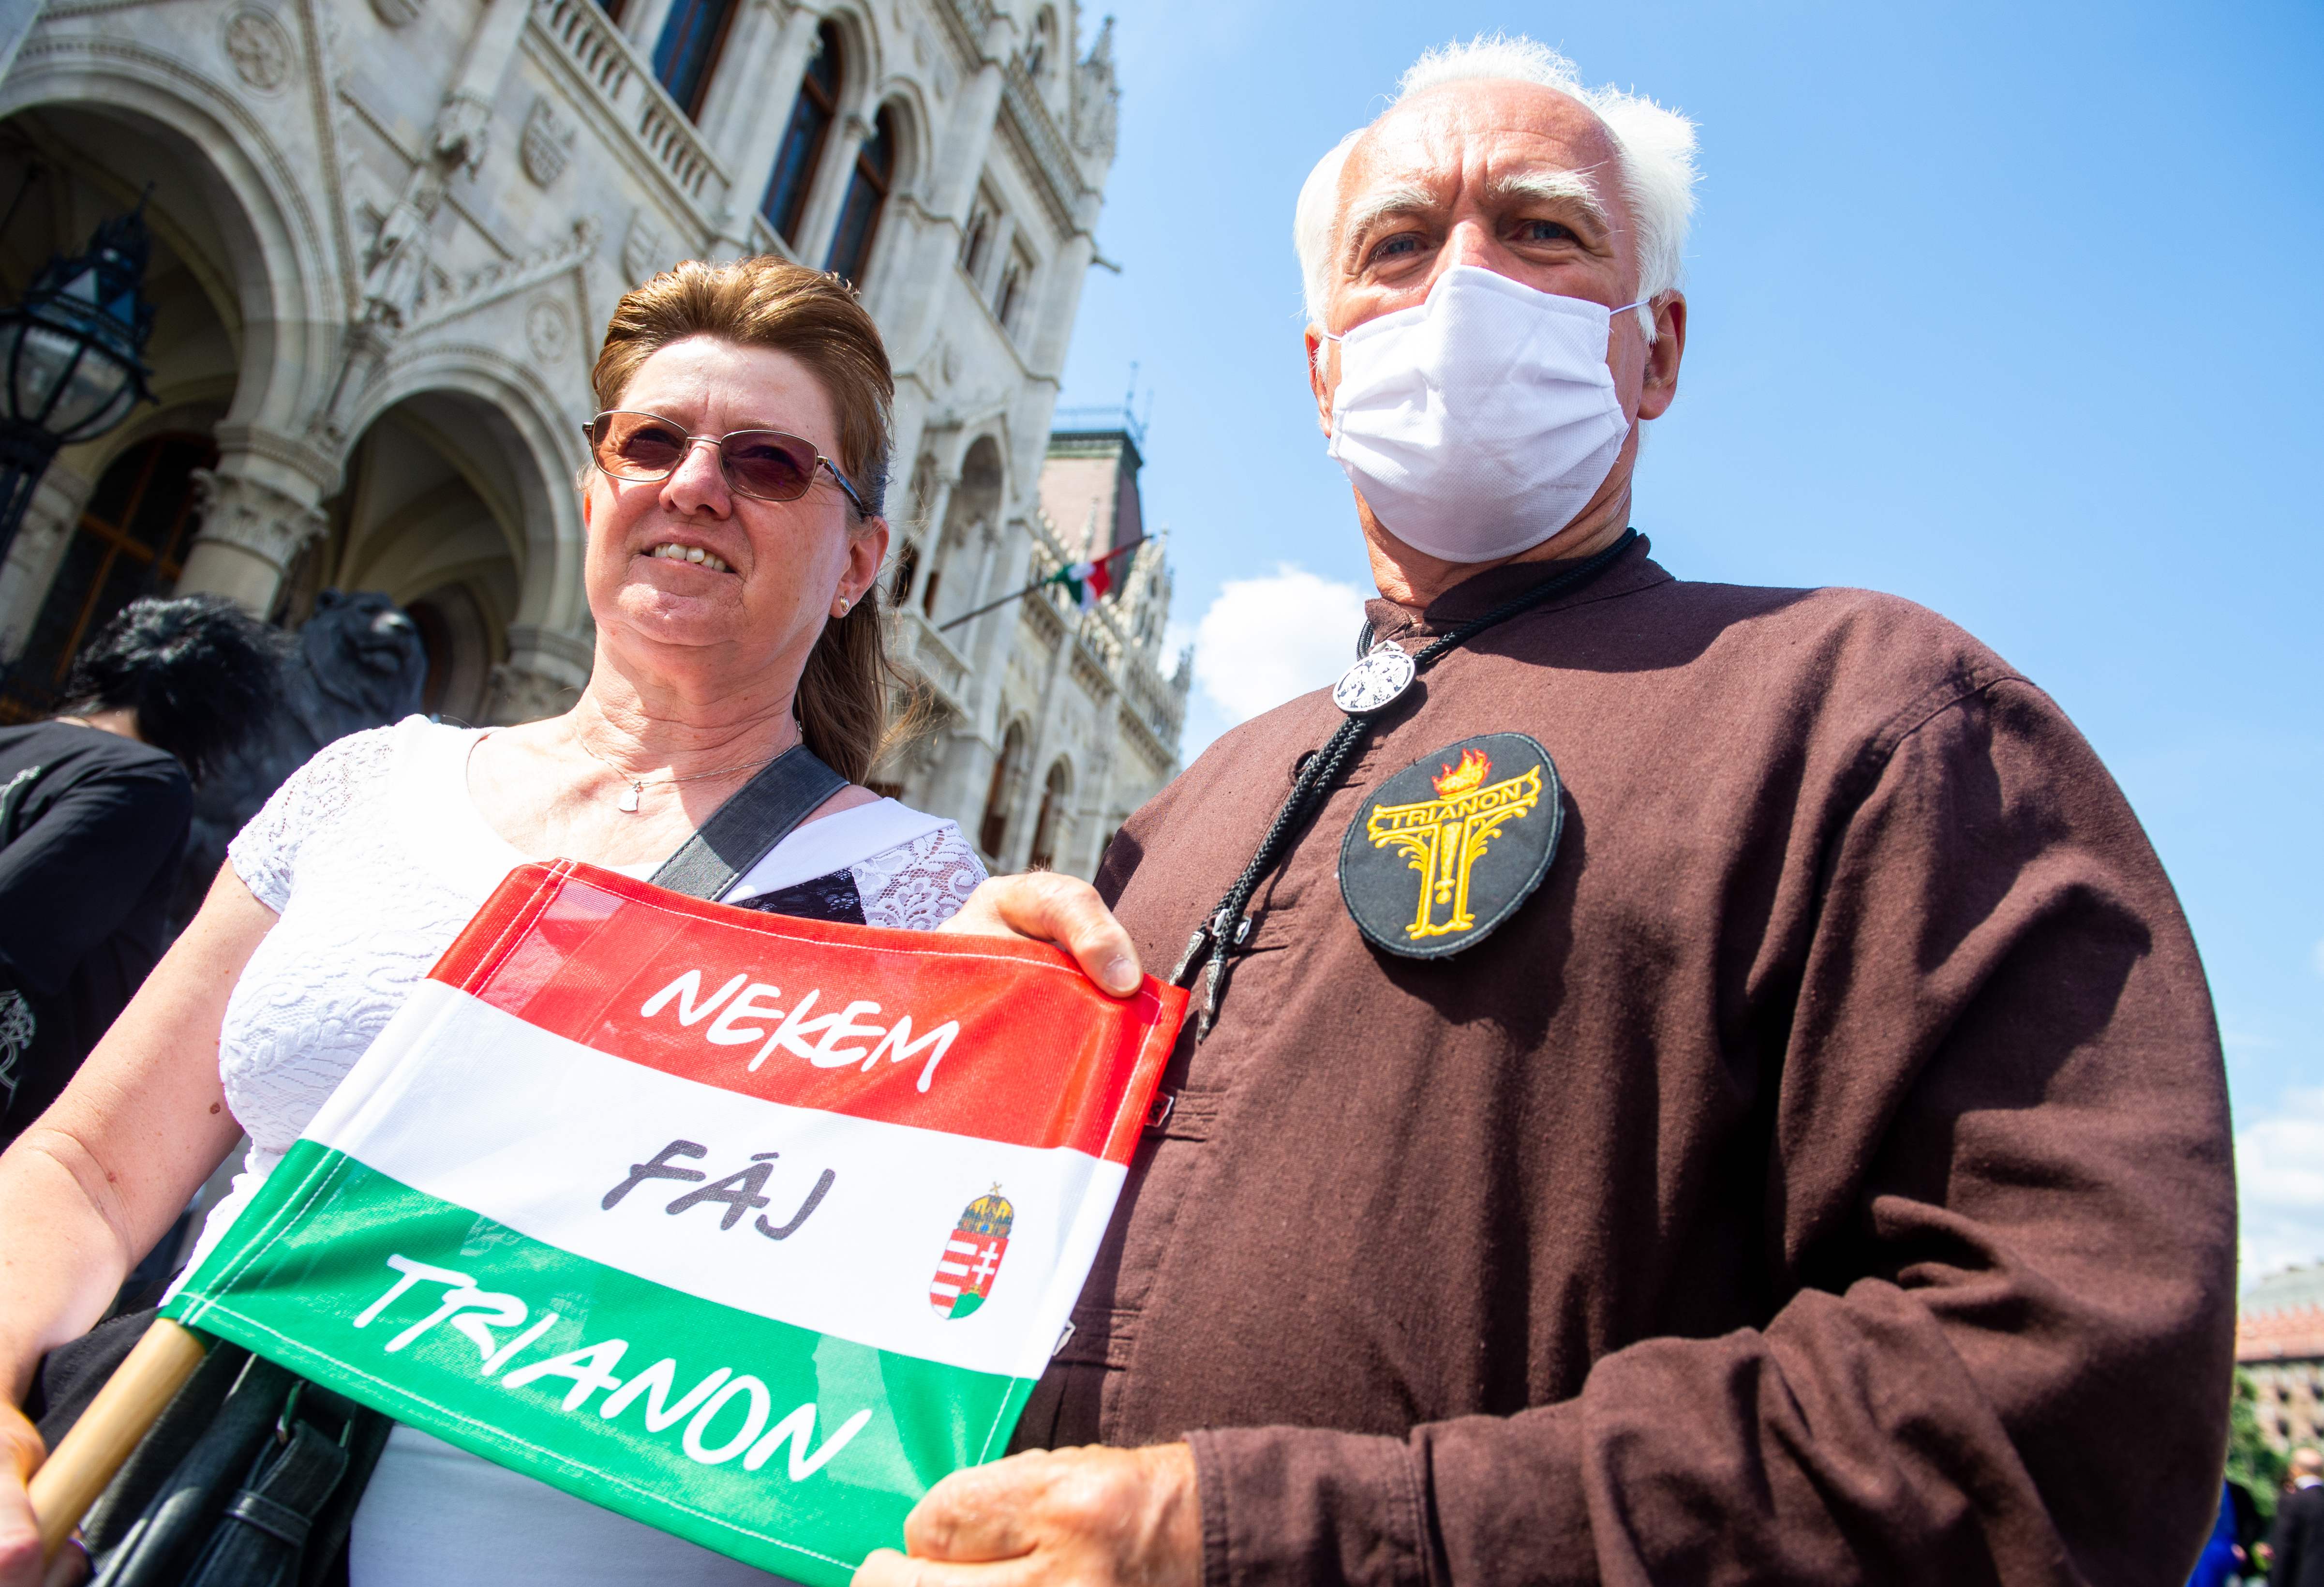 “I am hurt by Trianon.” Supporters of the World Federation of Hungarians take part in a memorial event in front of the Hungarian Parliament in Budapest on June 2, 2020, commemorating the 100th anniversary of the WWI peace agreement.